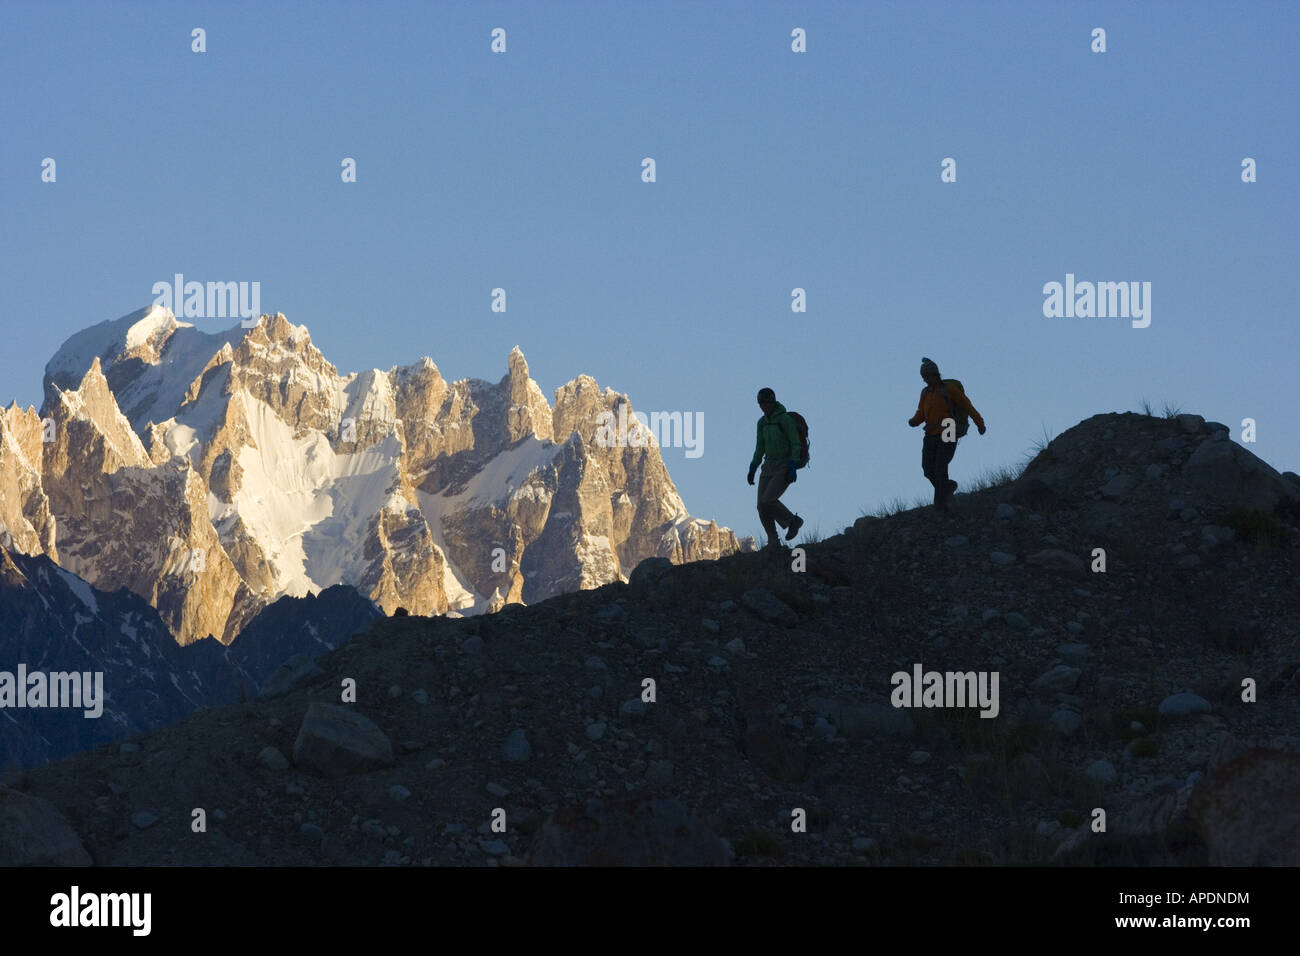 A silhouette of two women hikers on the Biafo glacier in the Karakoram Himalaya in Pakistan Stock Photo